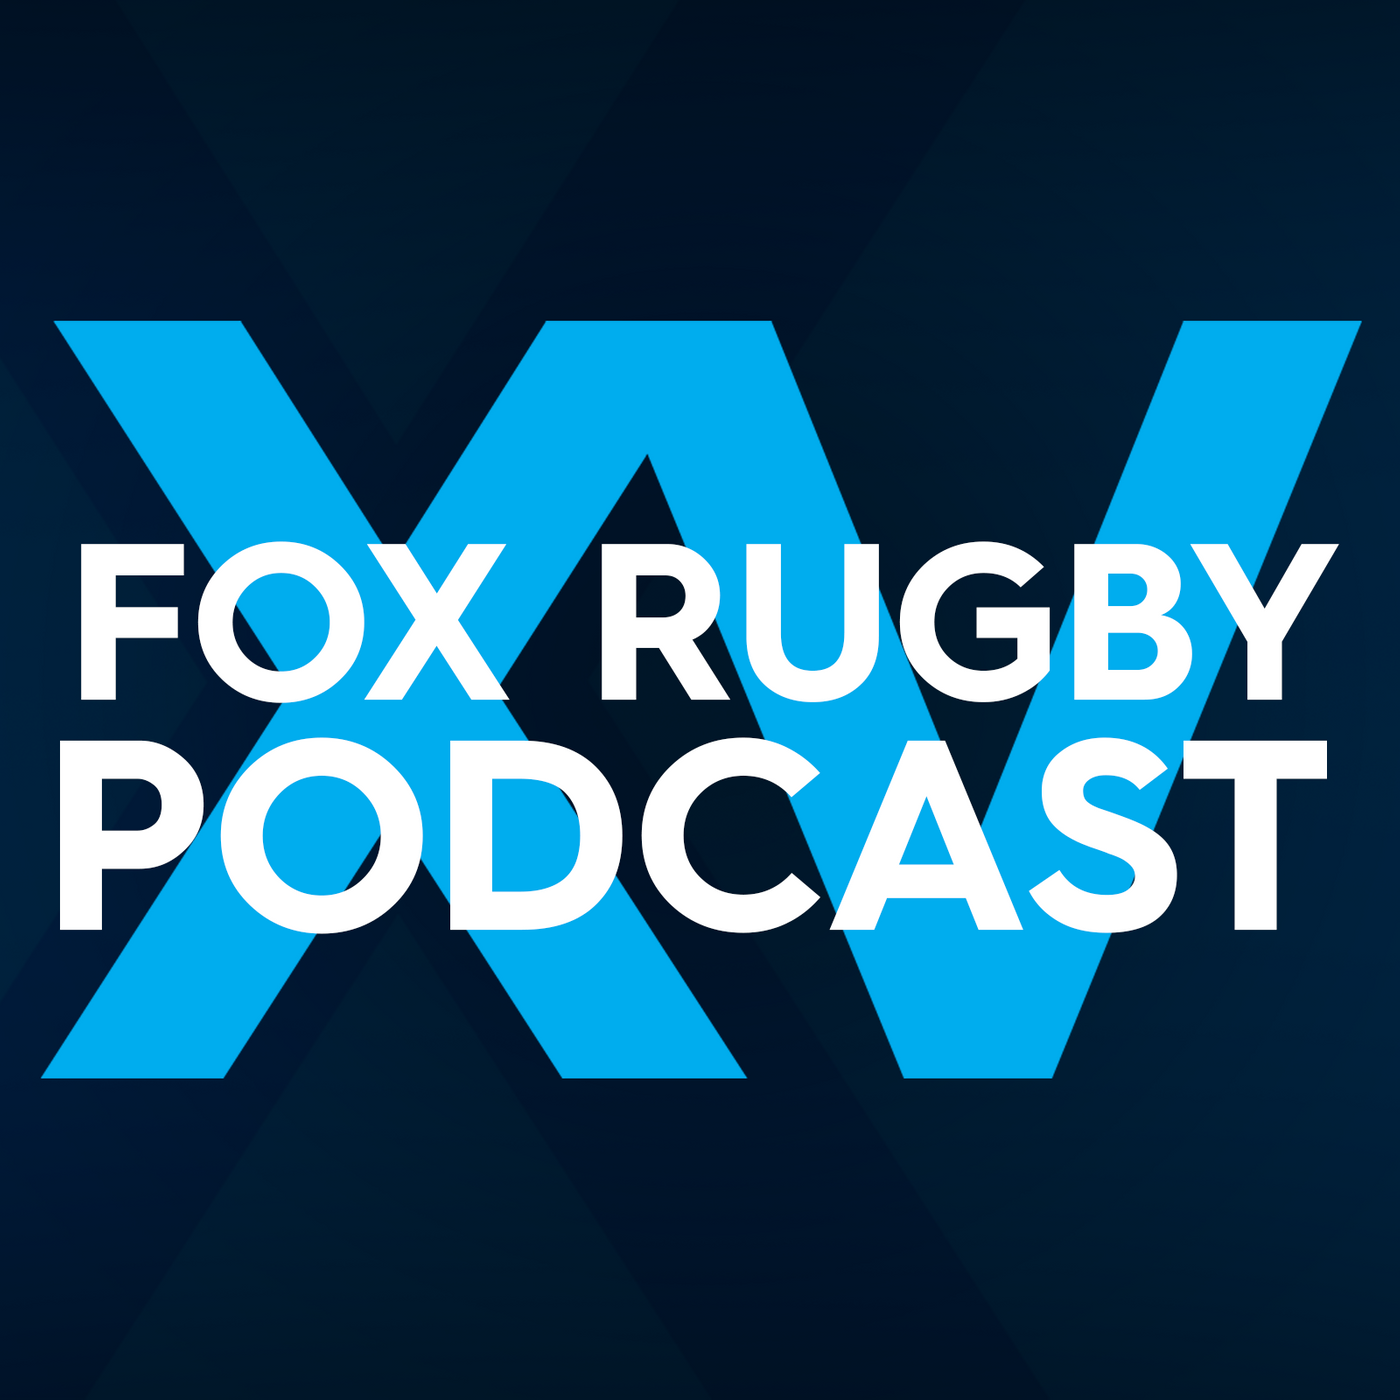 MATT TO'OMUA & TIM HORAN | Short and Sharp chat with Matt To'omua in Wallabies camp | Bledisloe Preview | Life in quarantine | Who's impressed? | Life under the new regime